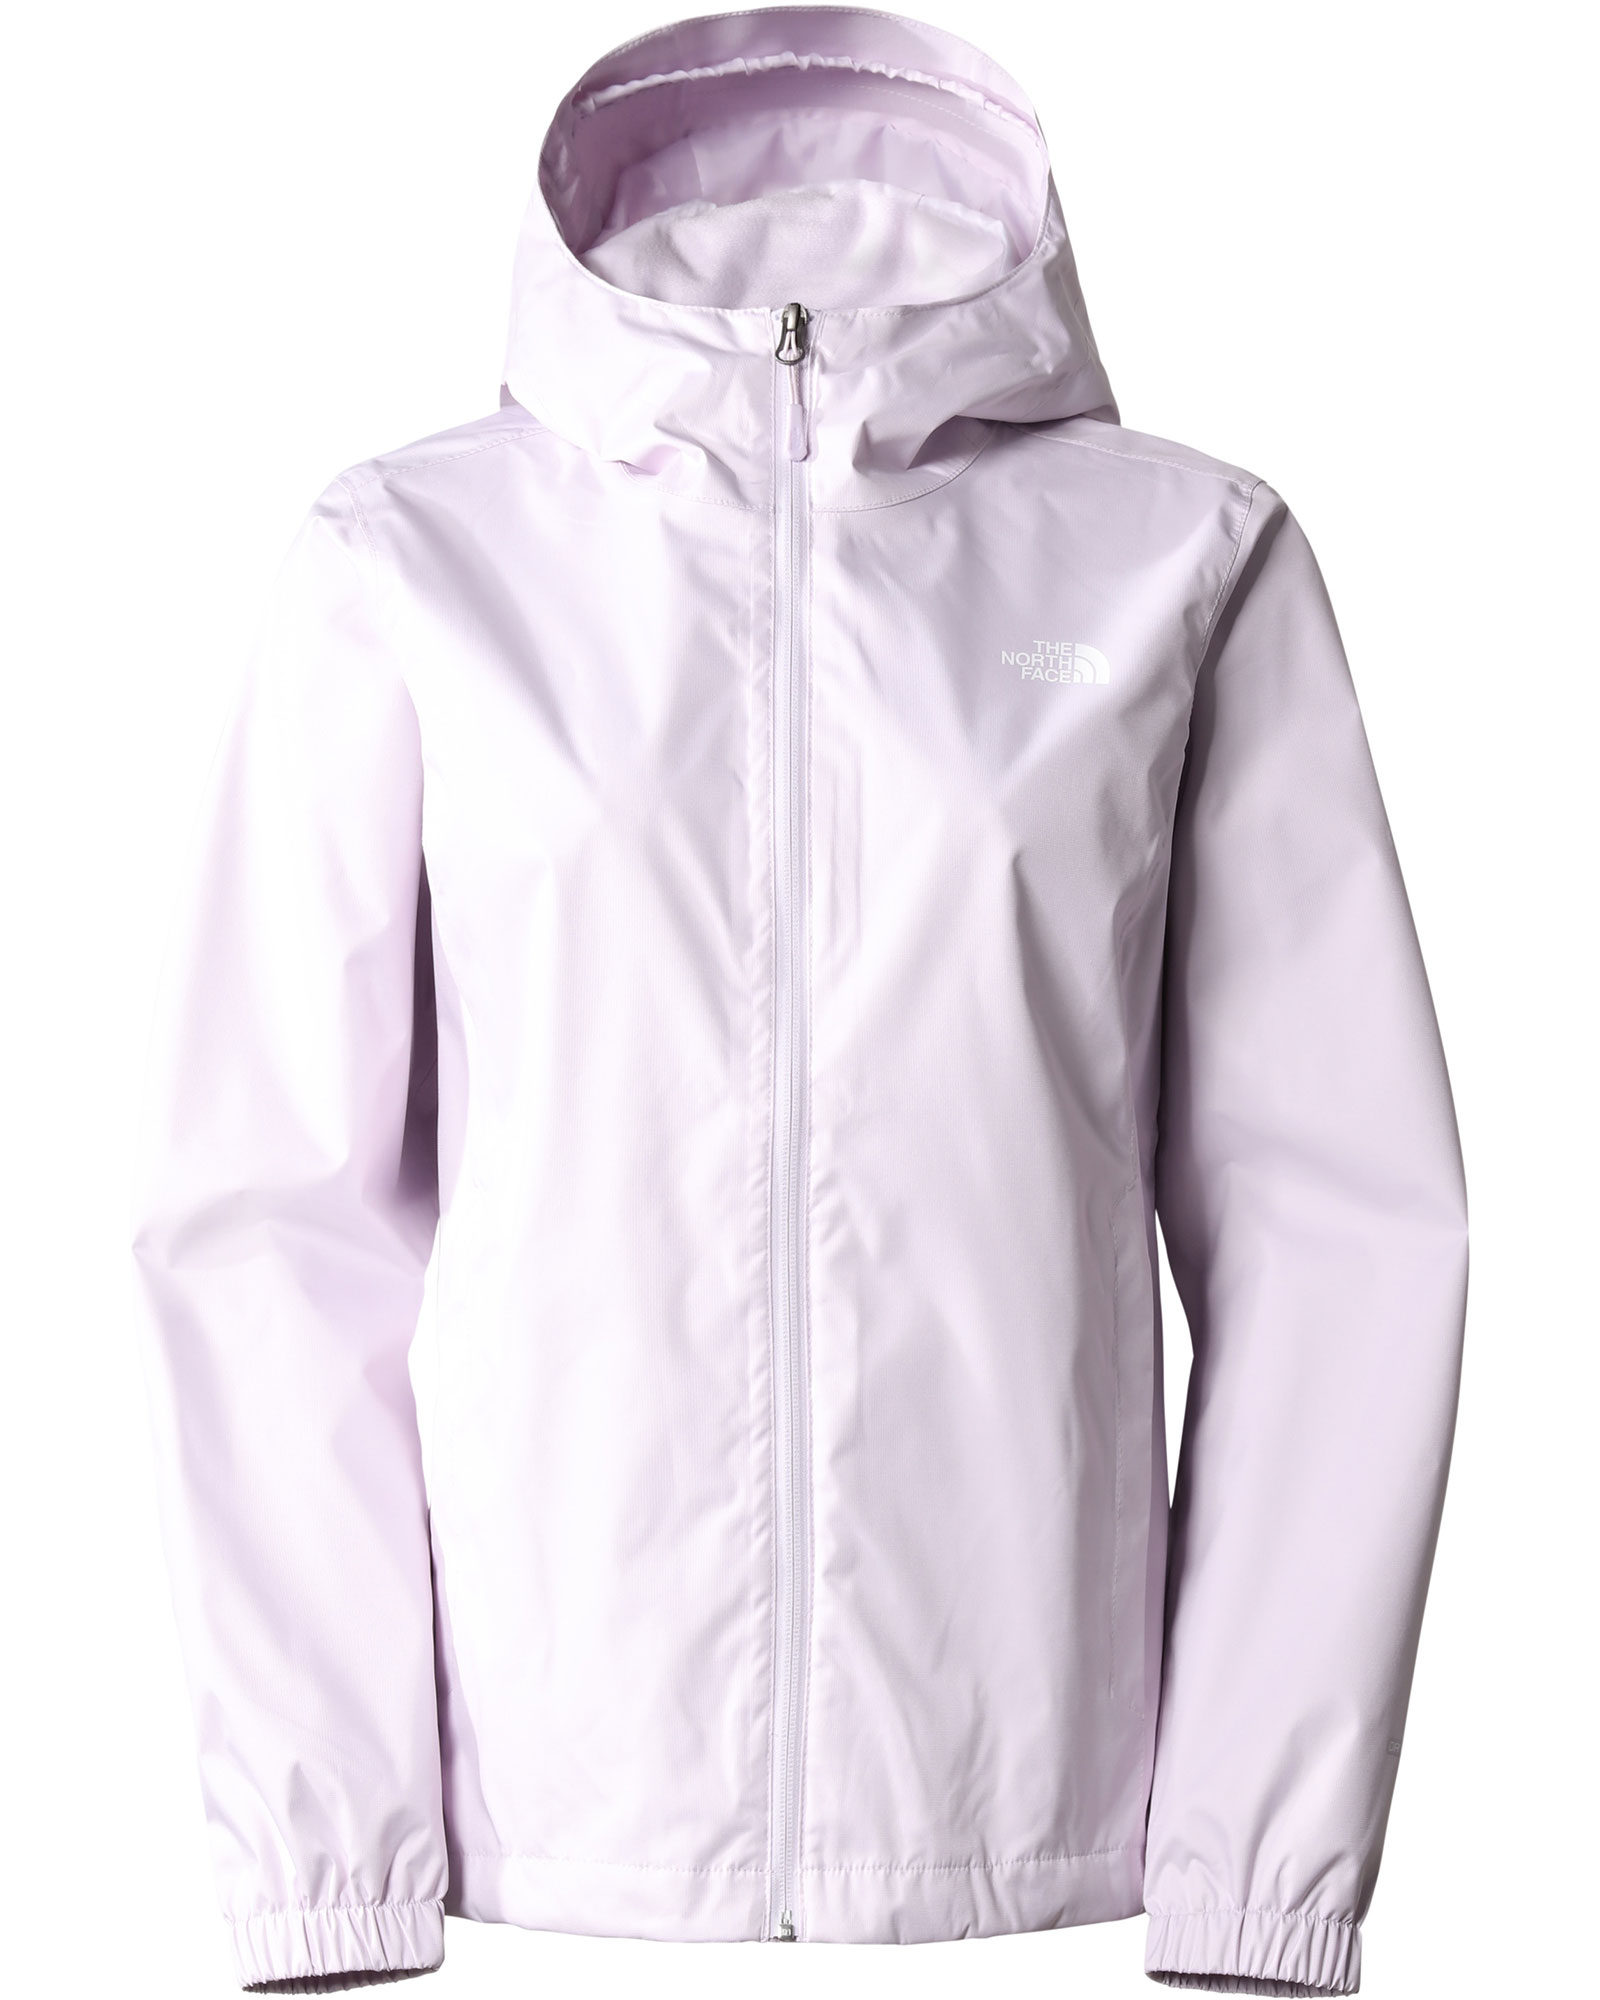 The North Face Quest DryVent Women’s Jacket - Lavender Fog S